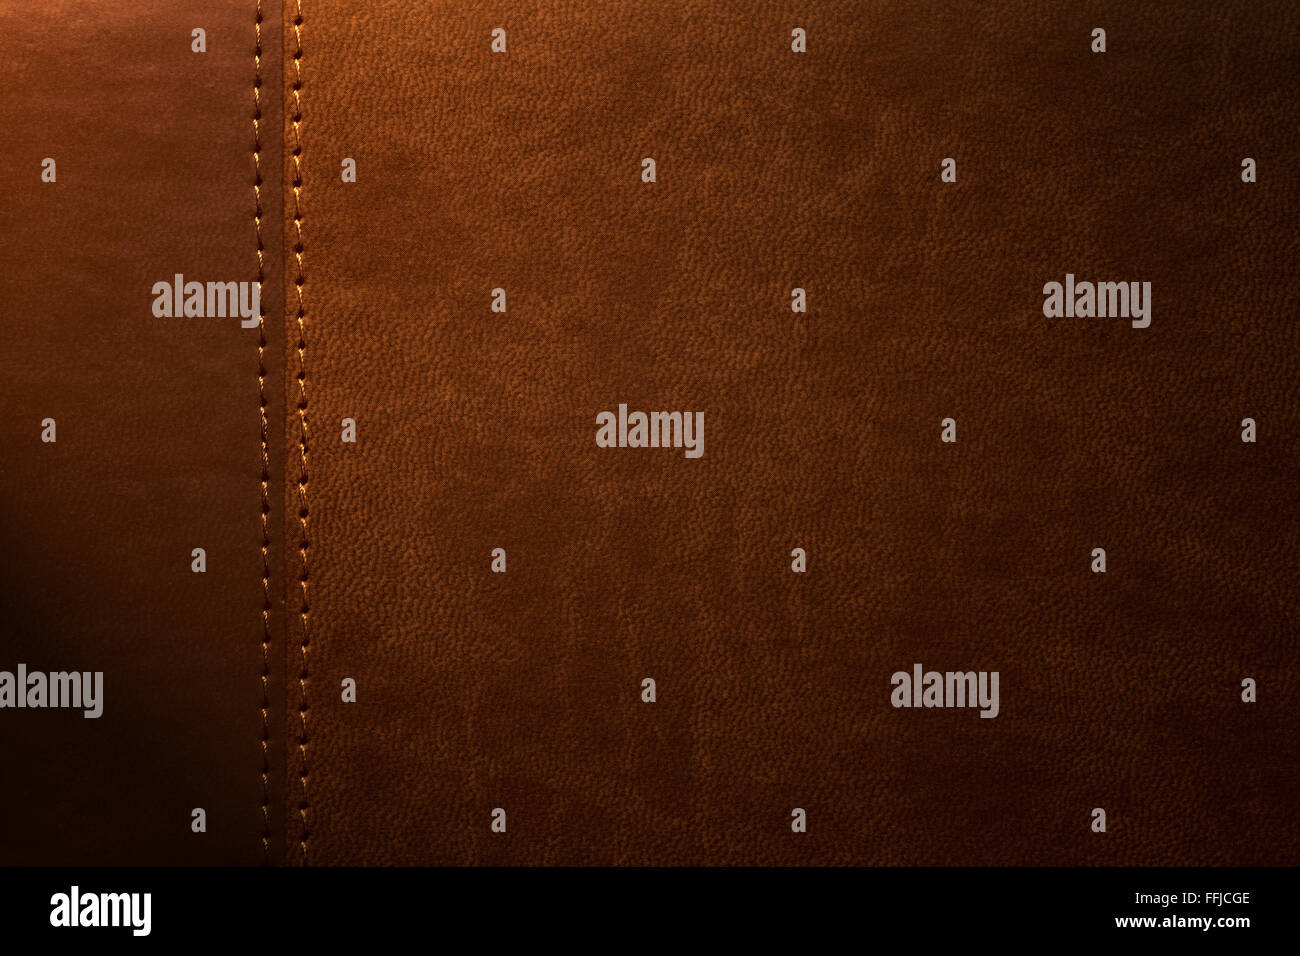 brown leather texture with seam at margin Stock Photo